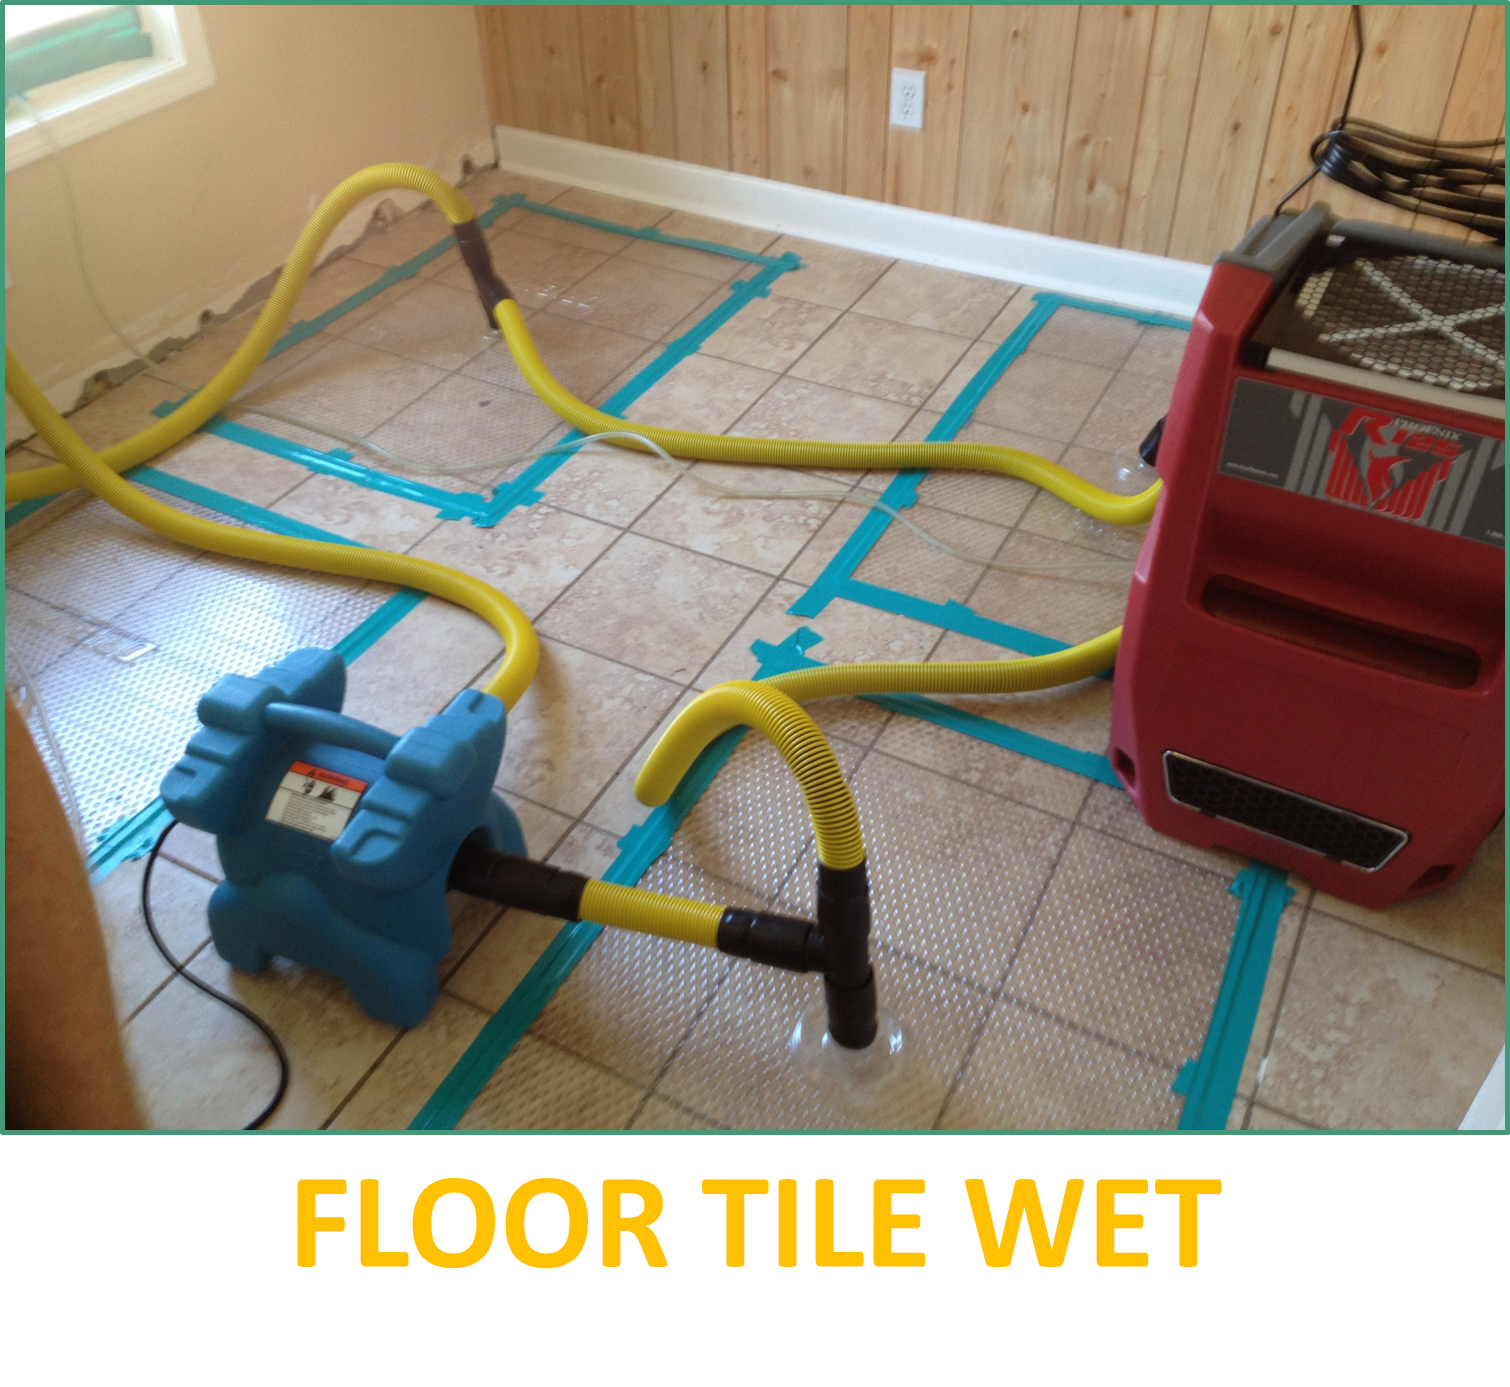 Roofing Experts saved wet tile flooring!